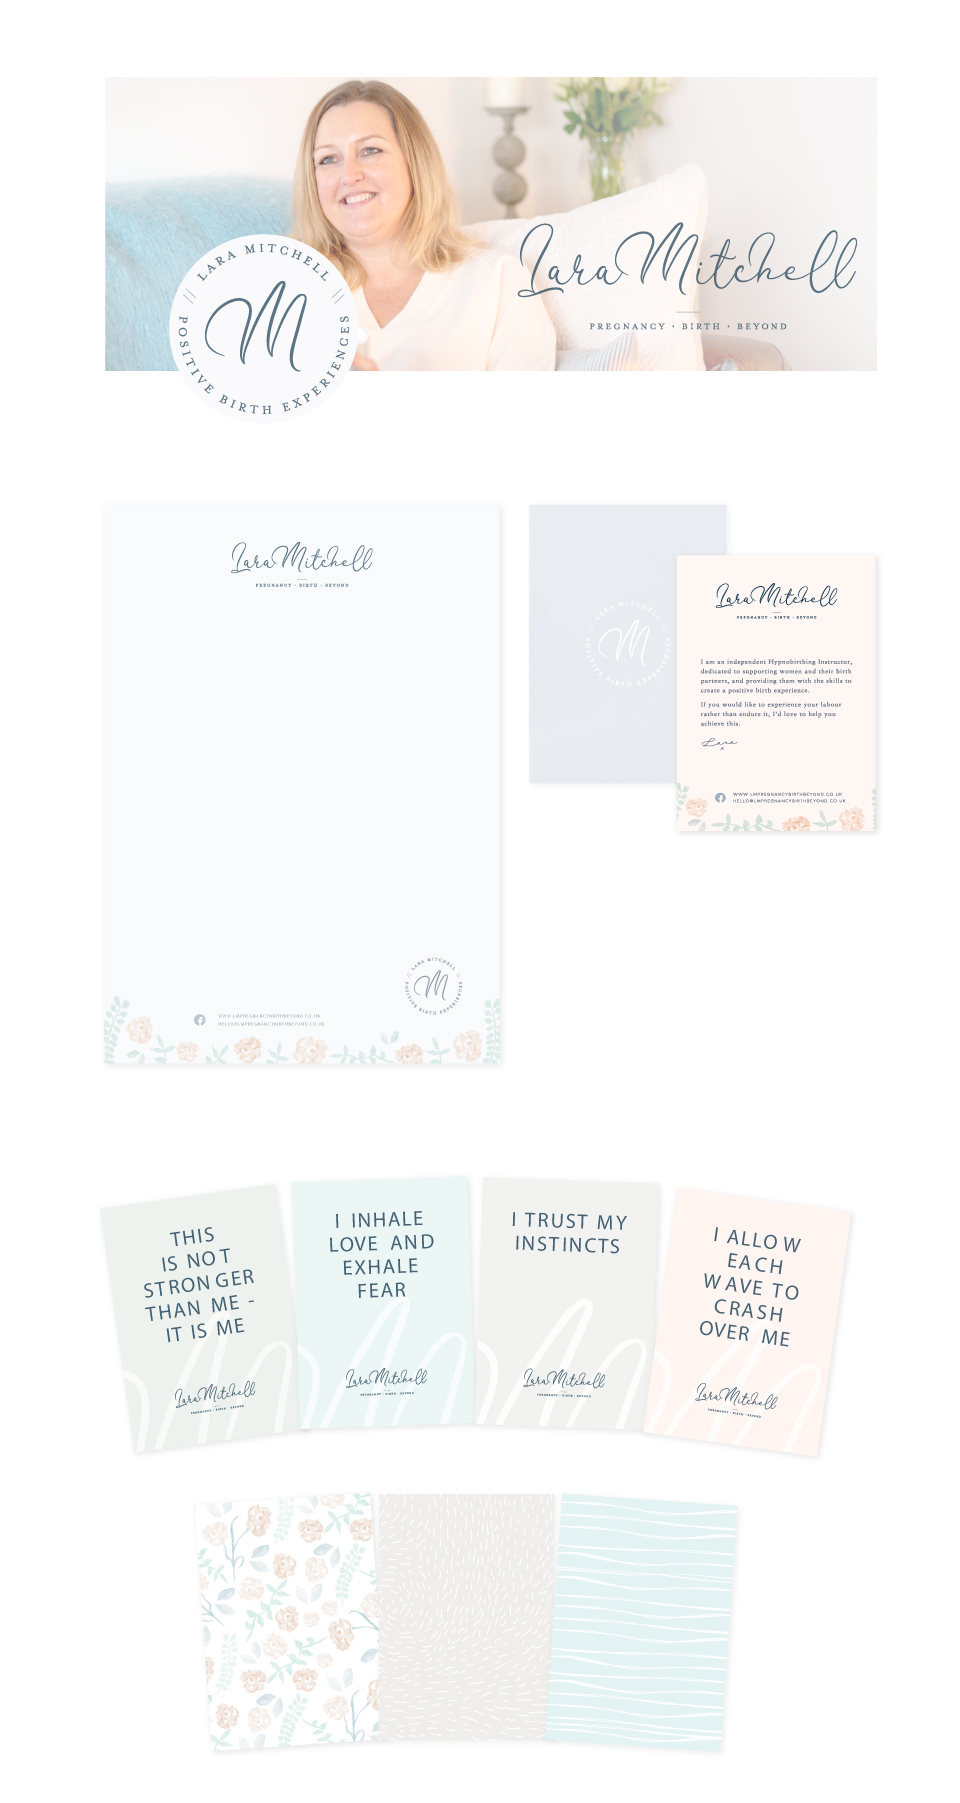 A collection of the letterhead, promotional card, and affirmation cards created for Lara Mitchell.